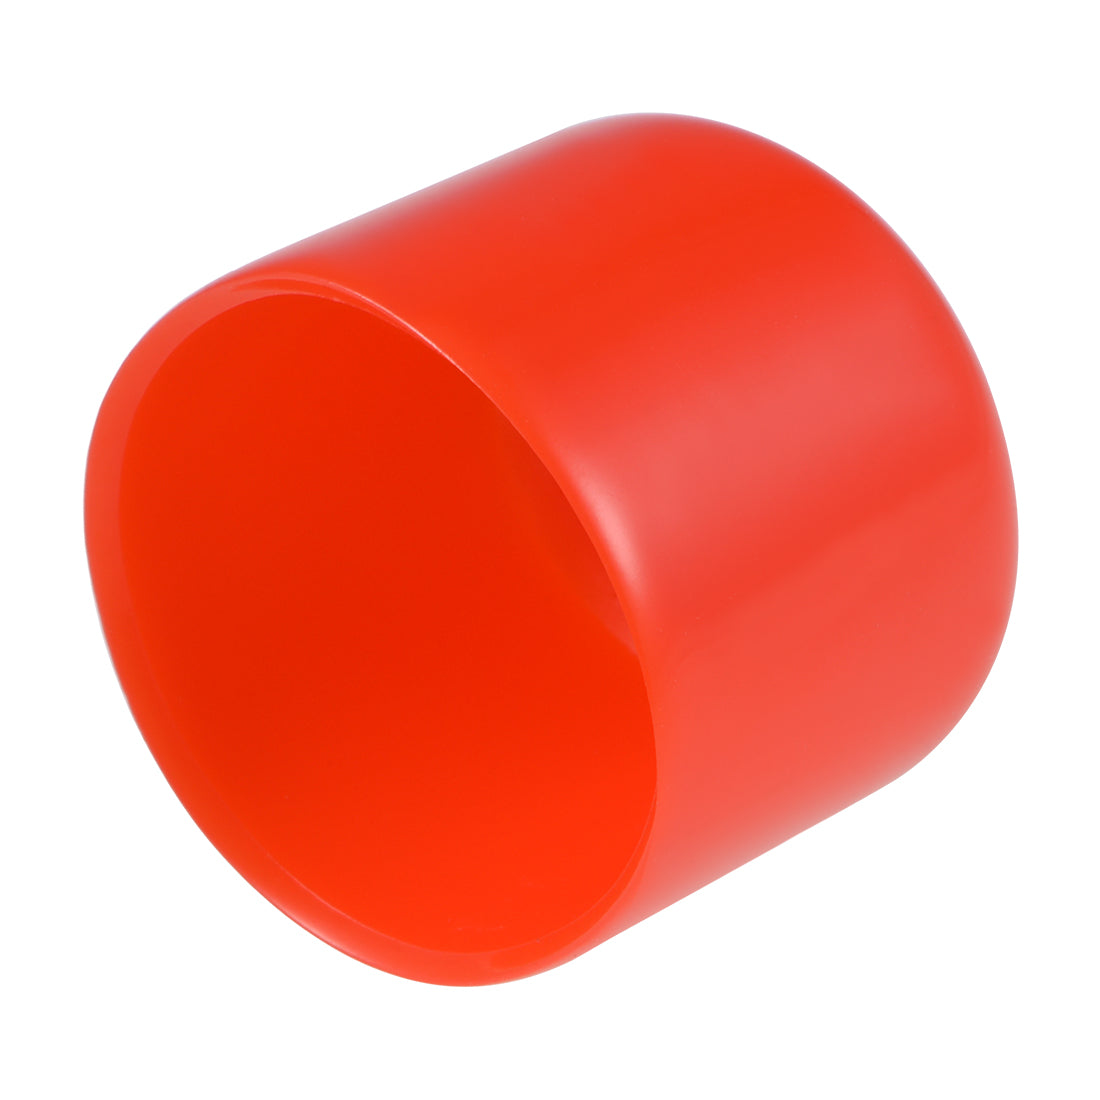 uxcell Uxcell 20pcs Rubber End Caps 34mm ID 35mm Height Screw Thread Protectors Red